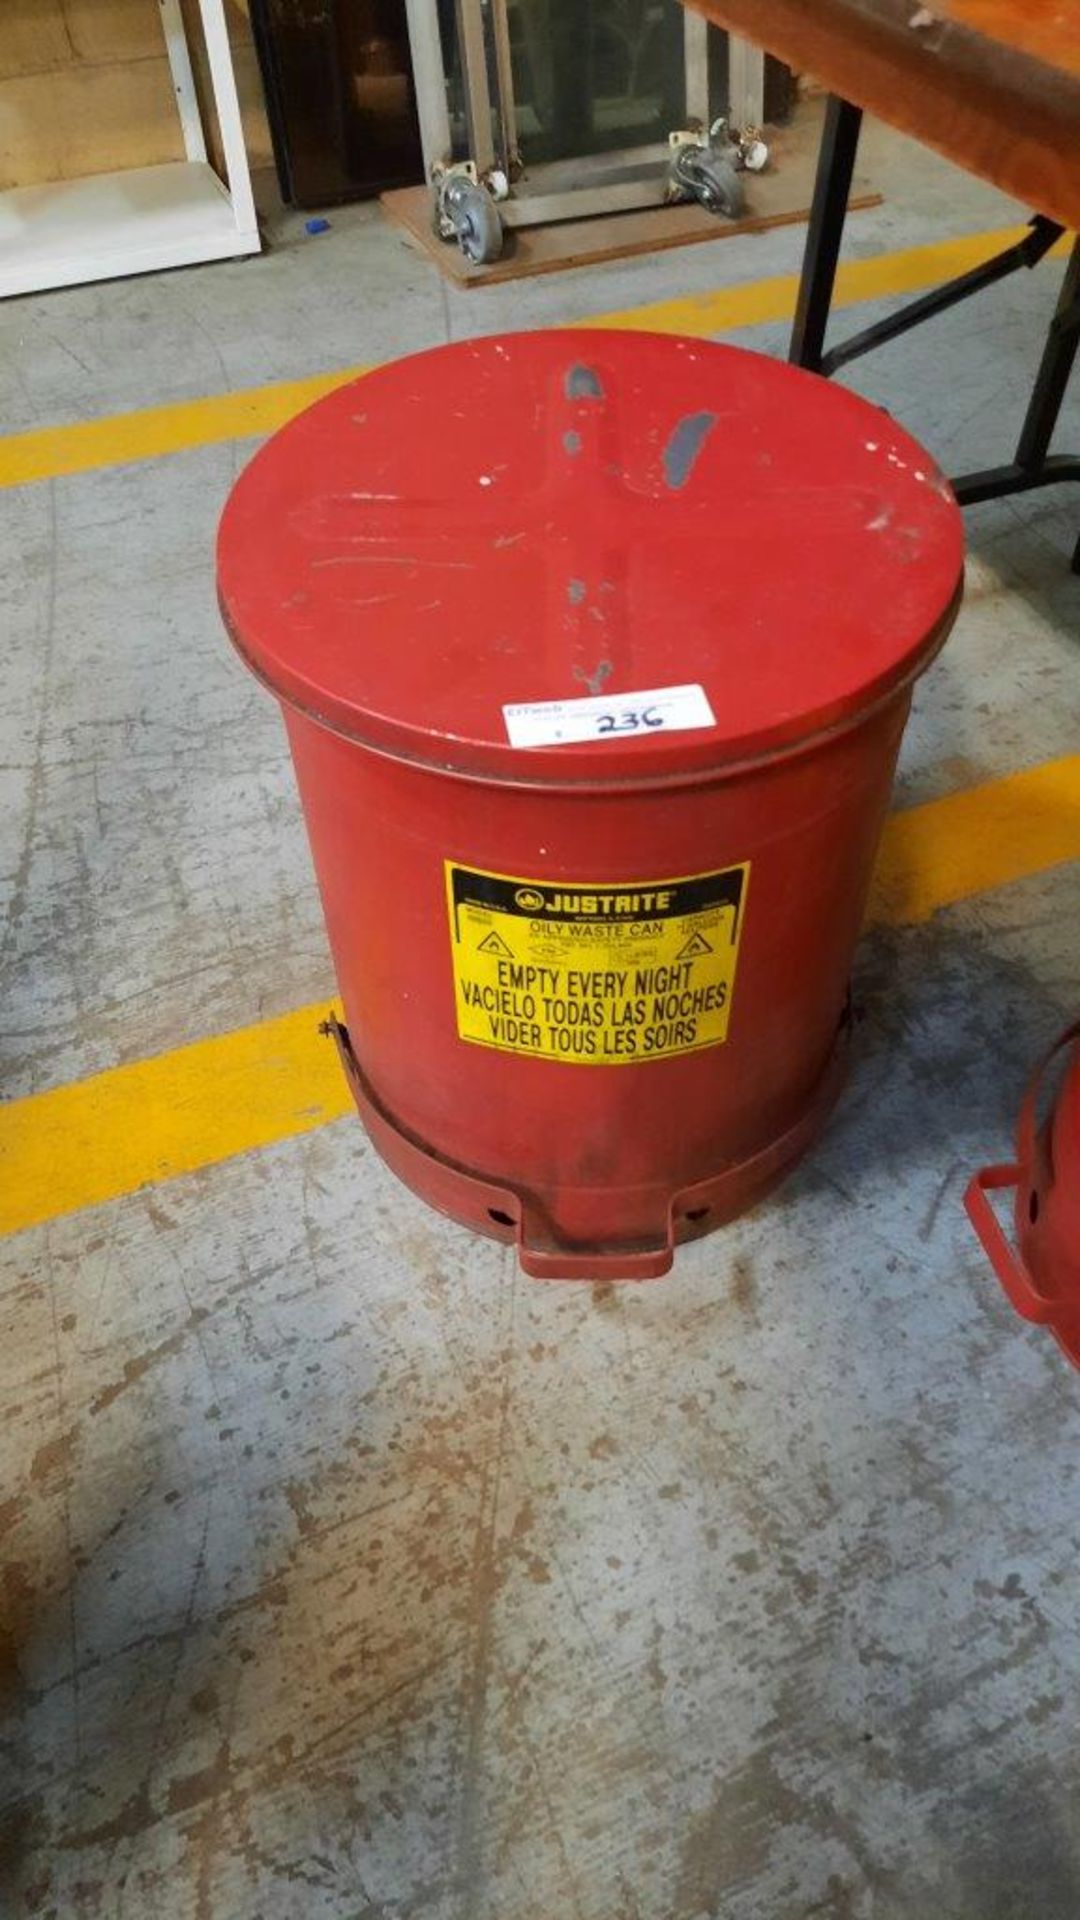 JUSTRITE Oily Waste Can